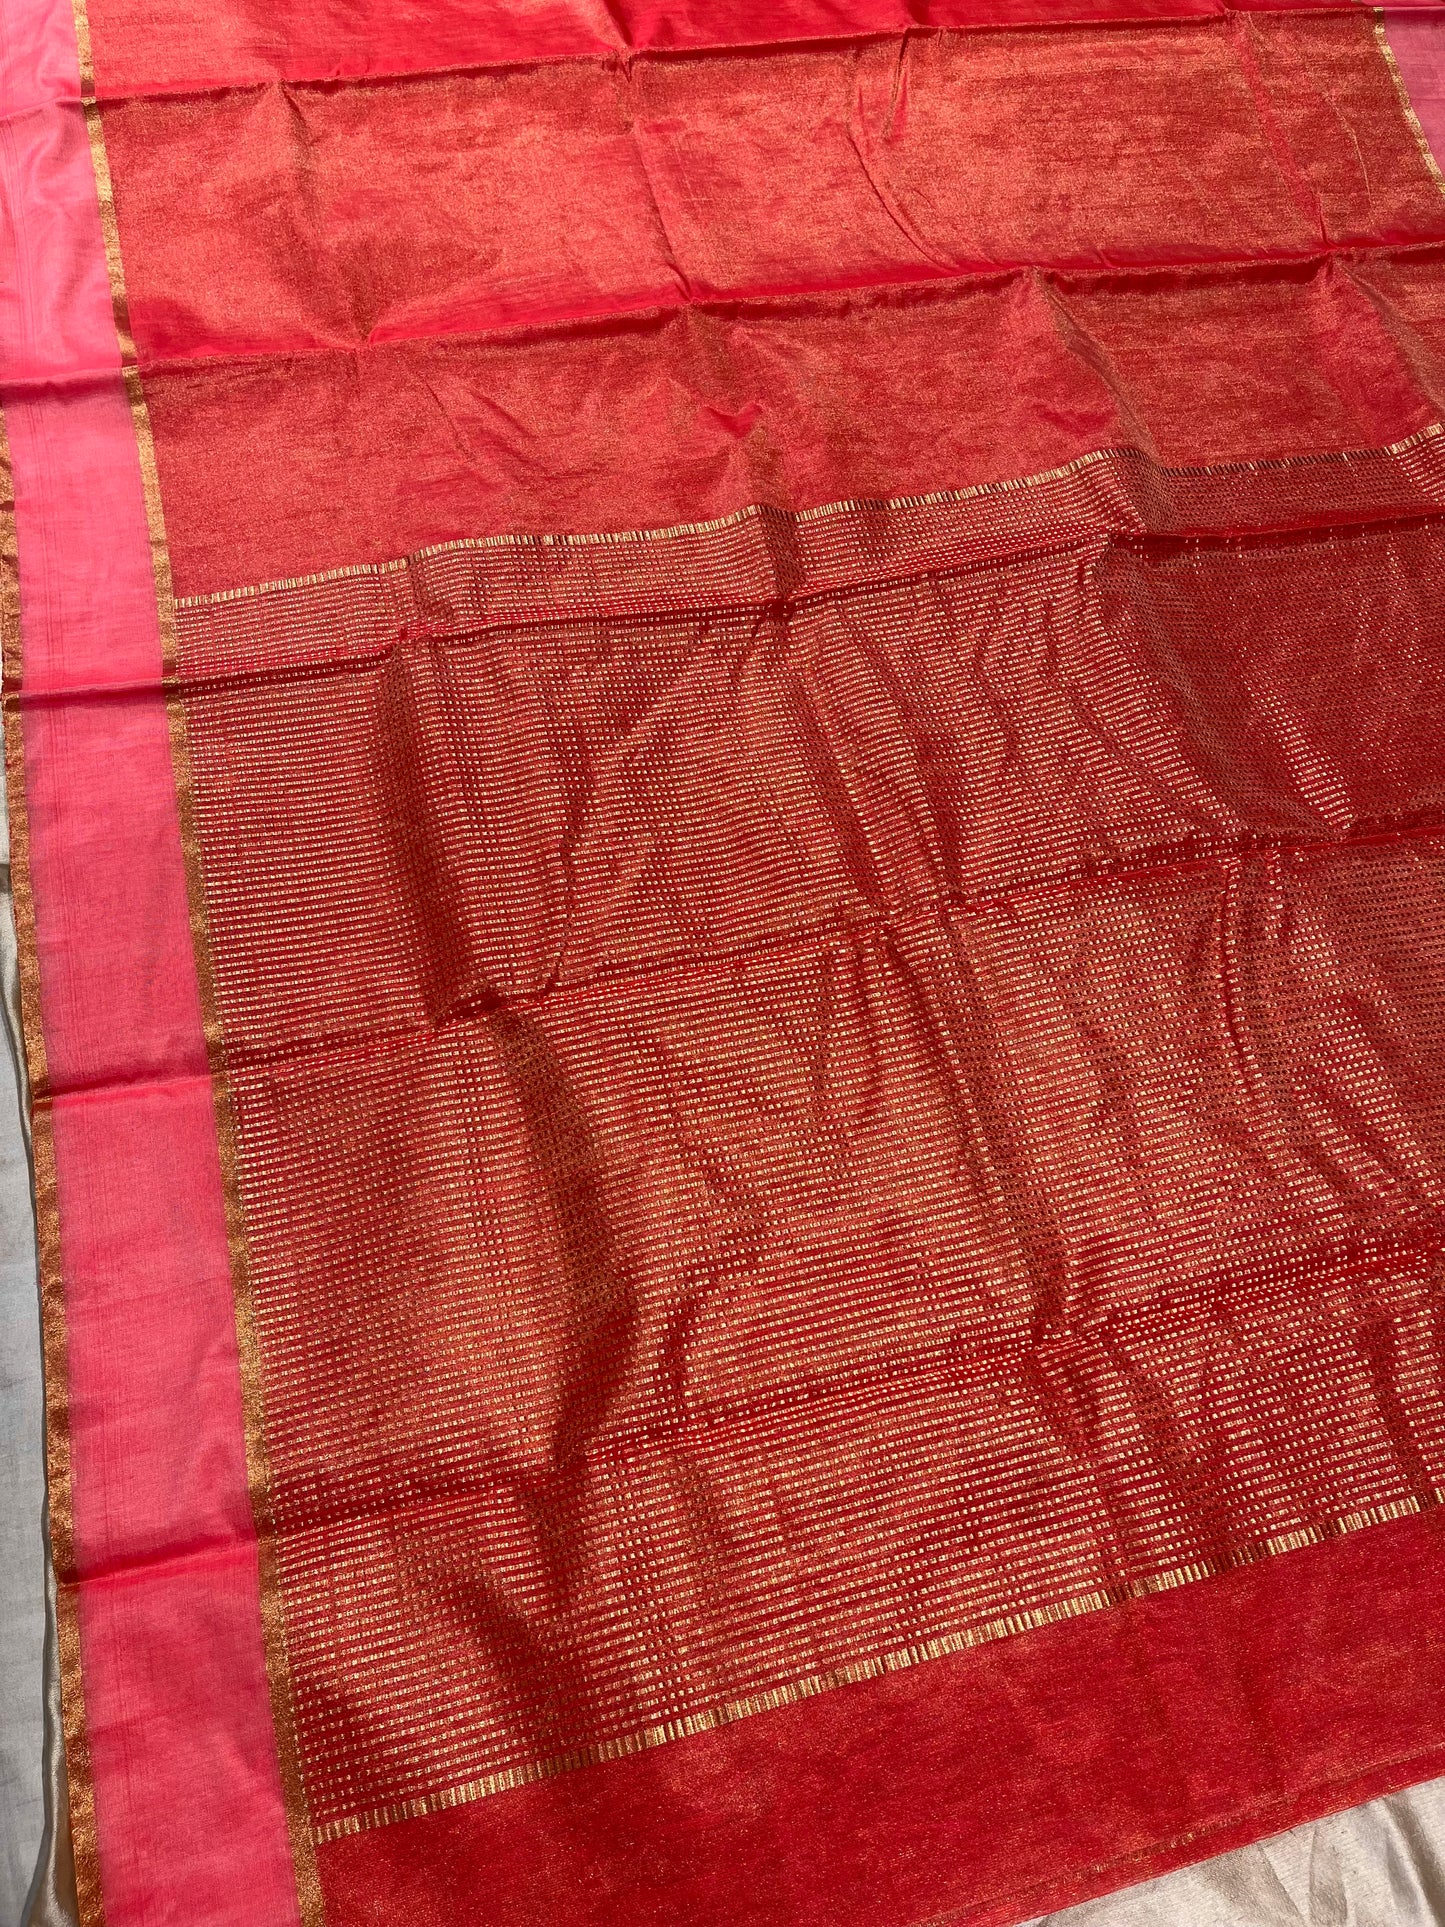 RUST RED COLOUR CHANDERI TISSUE SAREE WITH KIRKITA PALLA EMBELLISHED WITH ZARI WEAVES